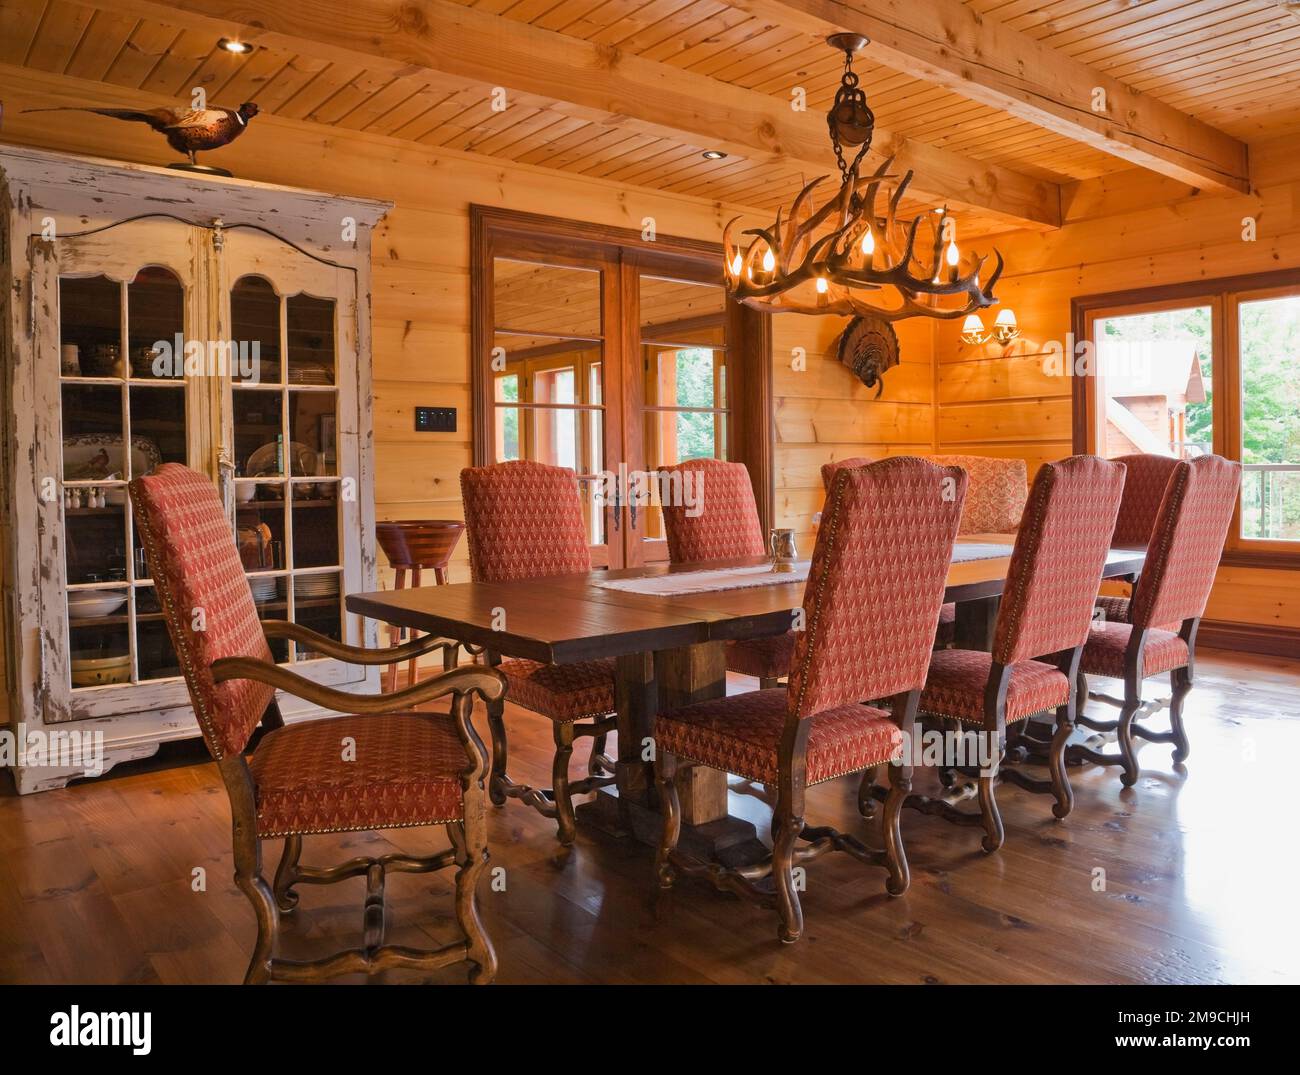 Wooden dining table with red and grey upholstered high back chairs in dining room on 1st floor inside flat log profile and timber home. Stock Photo